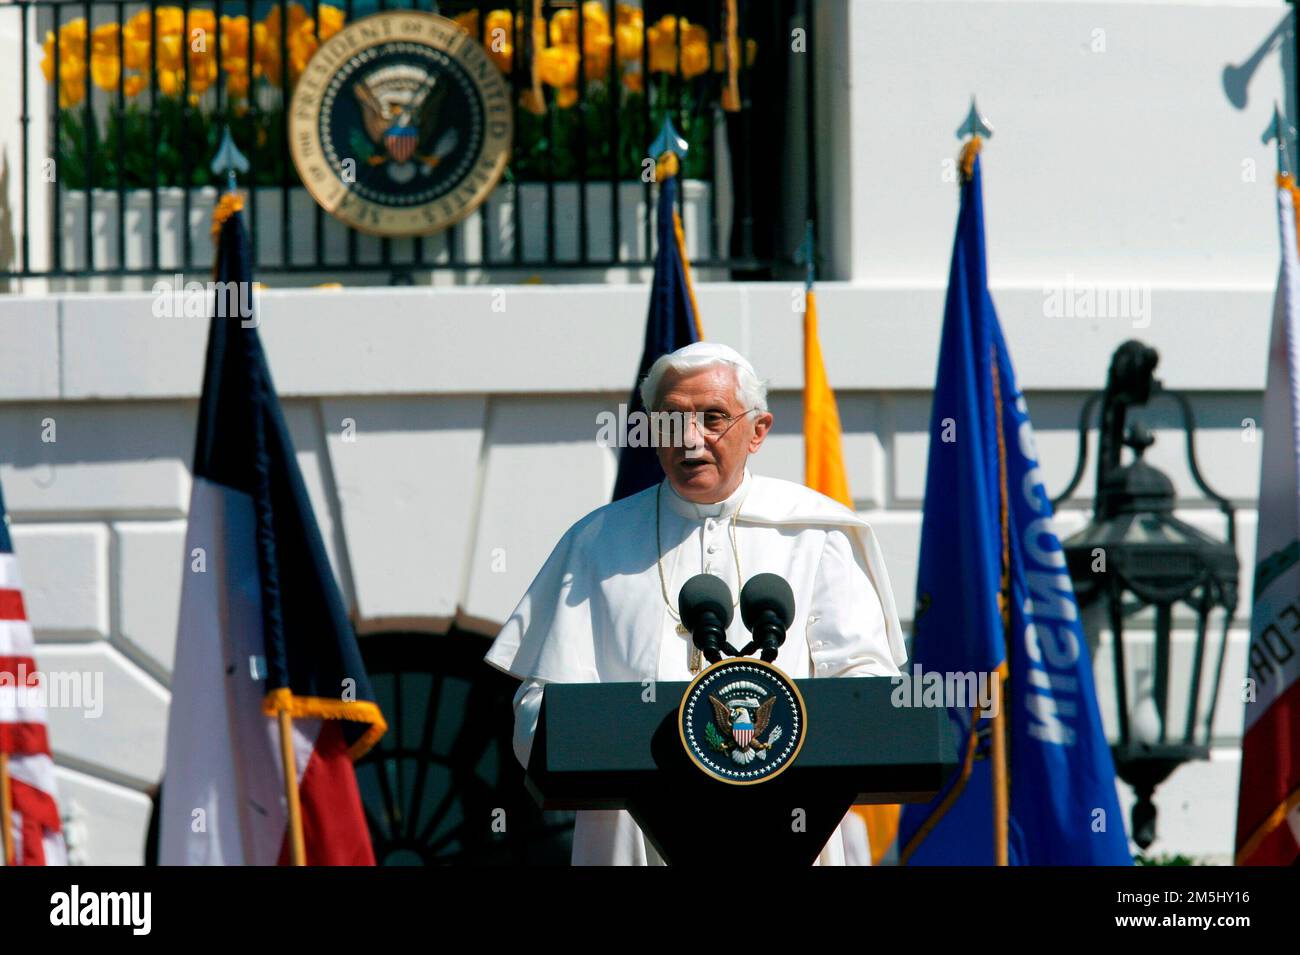 Pope Benedict XVI makes a speech during the Arrival Ceremony hosted by United States President George W. Bush and first lady Laura Bush in his honor on the South Lawn of the White House, Washington DC, April 16, 2008. Credit: Aude Guerrucci / Pool via CNP Stock Photo